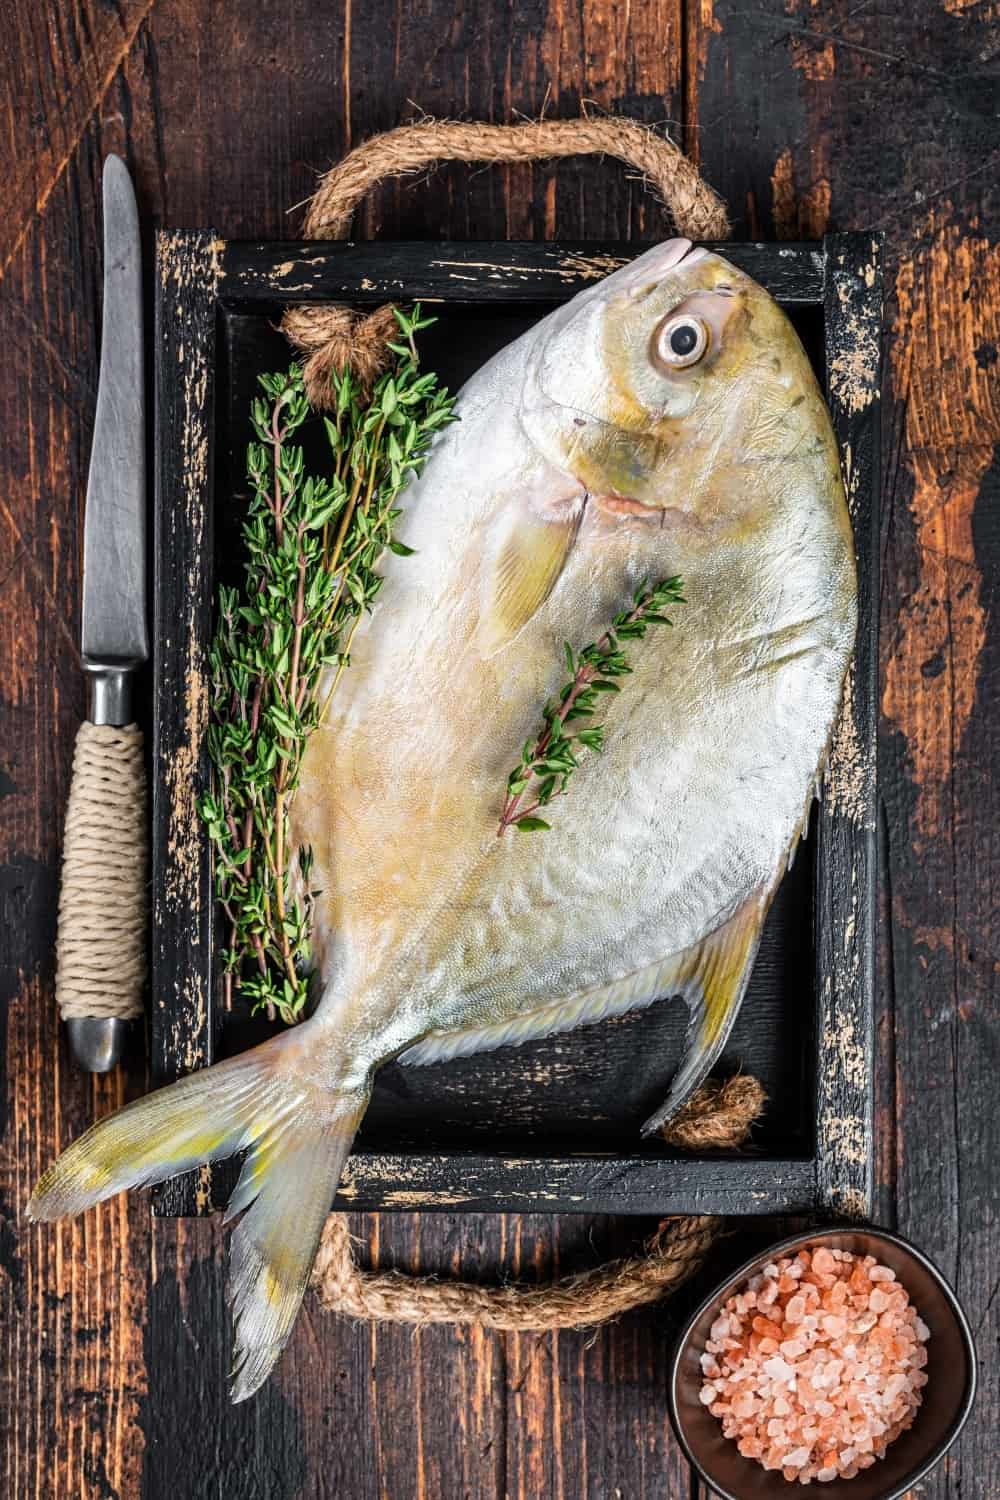 Raw fish butterfish or pompano with herbs in a wooden tray.